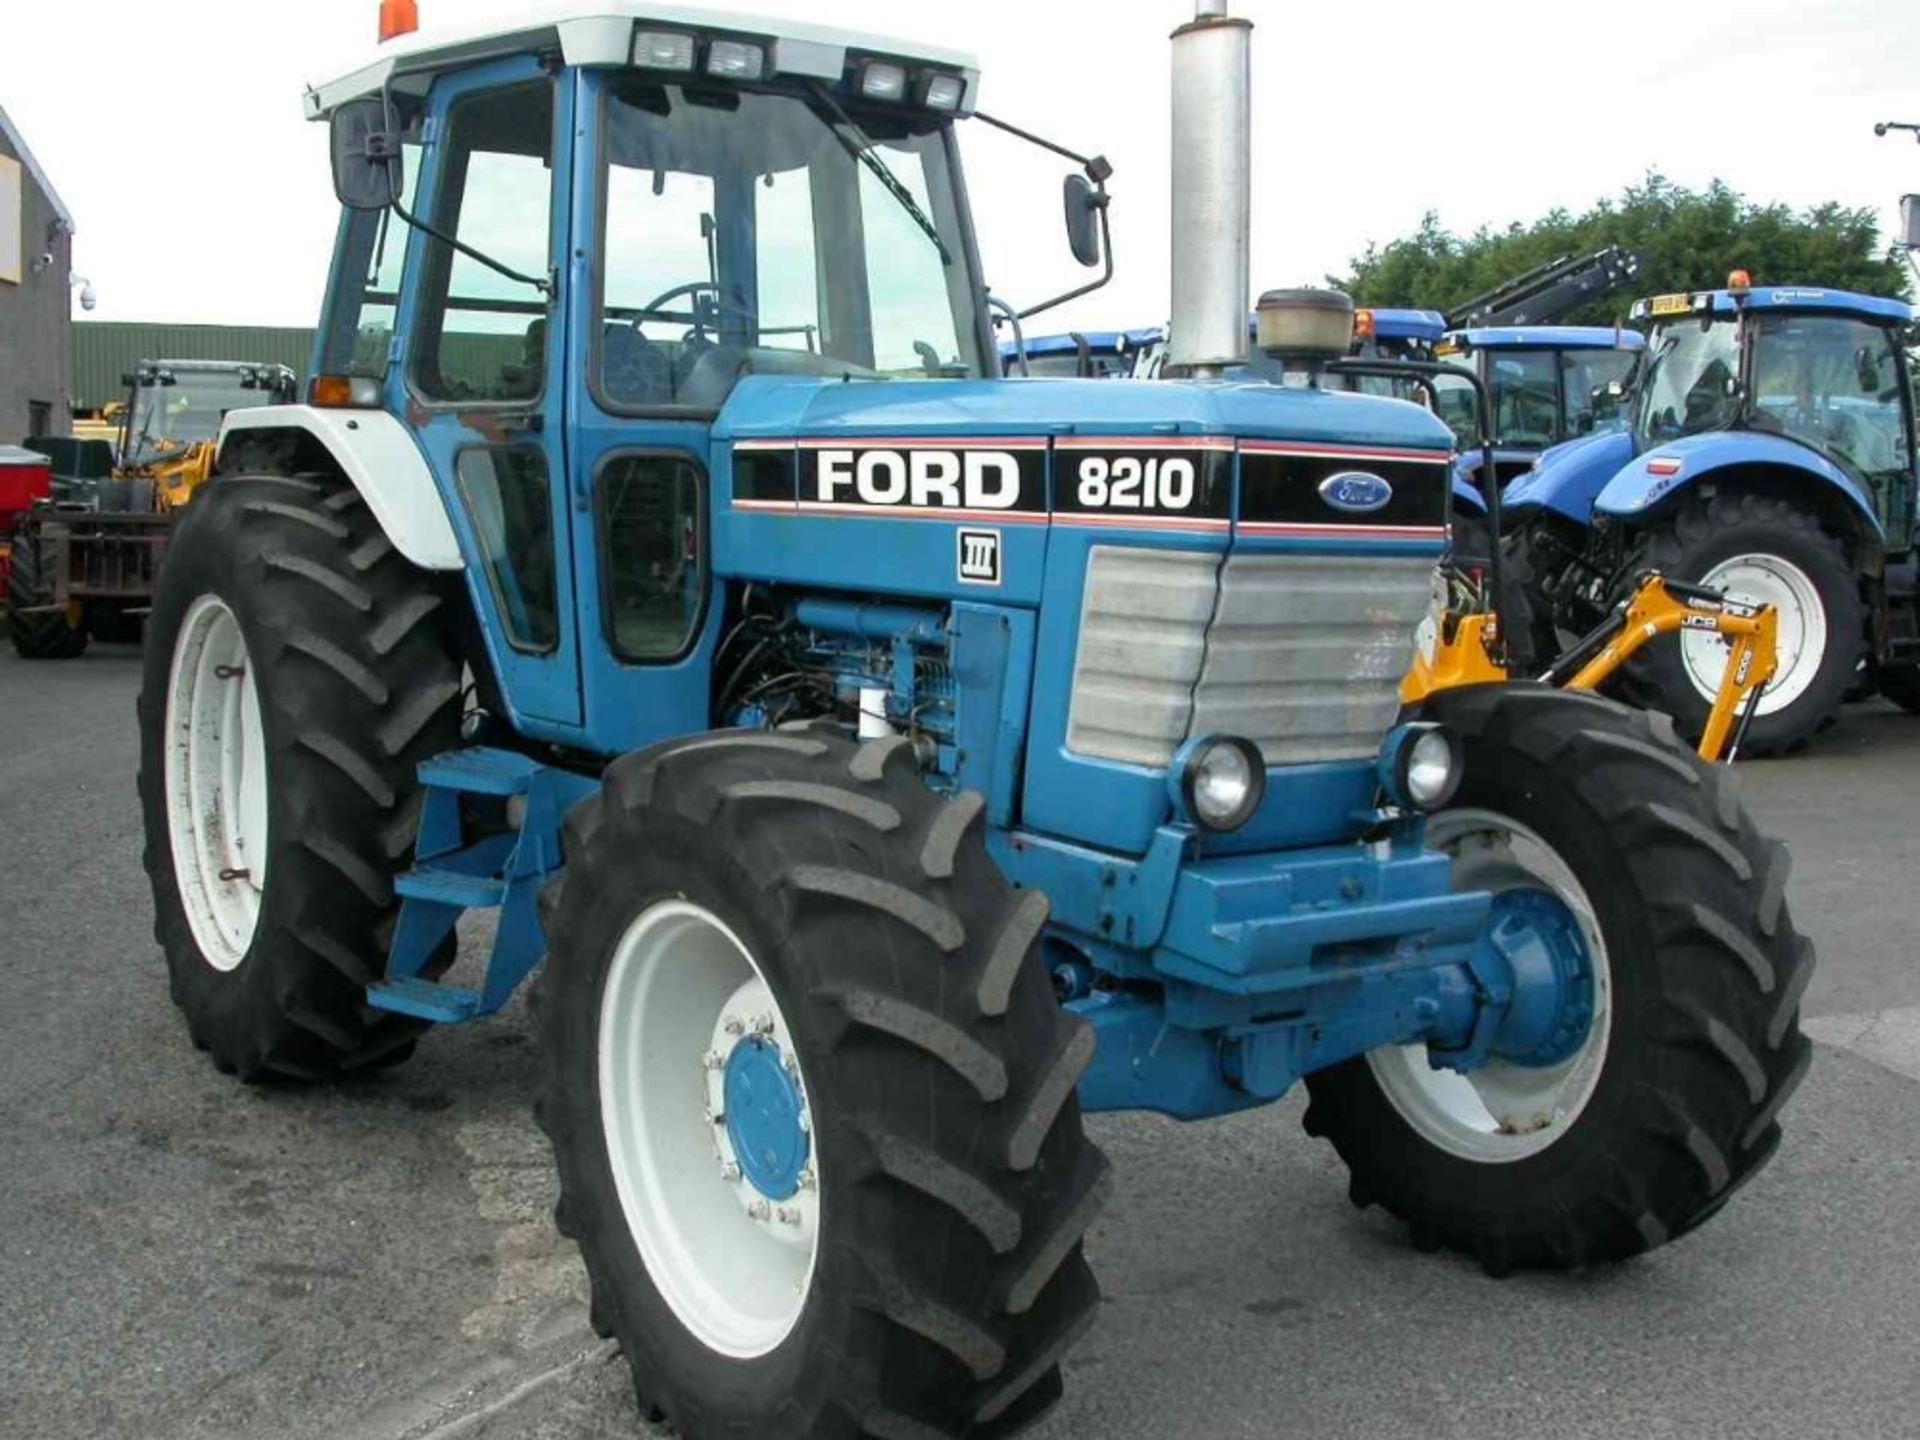 1991 Ford 8210 4wd Tractor - Image 7 of 10